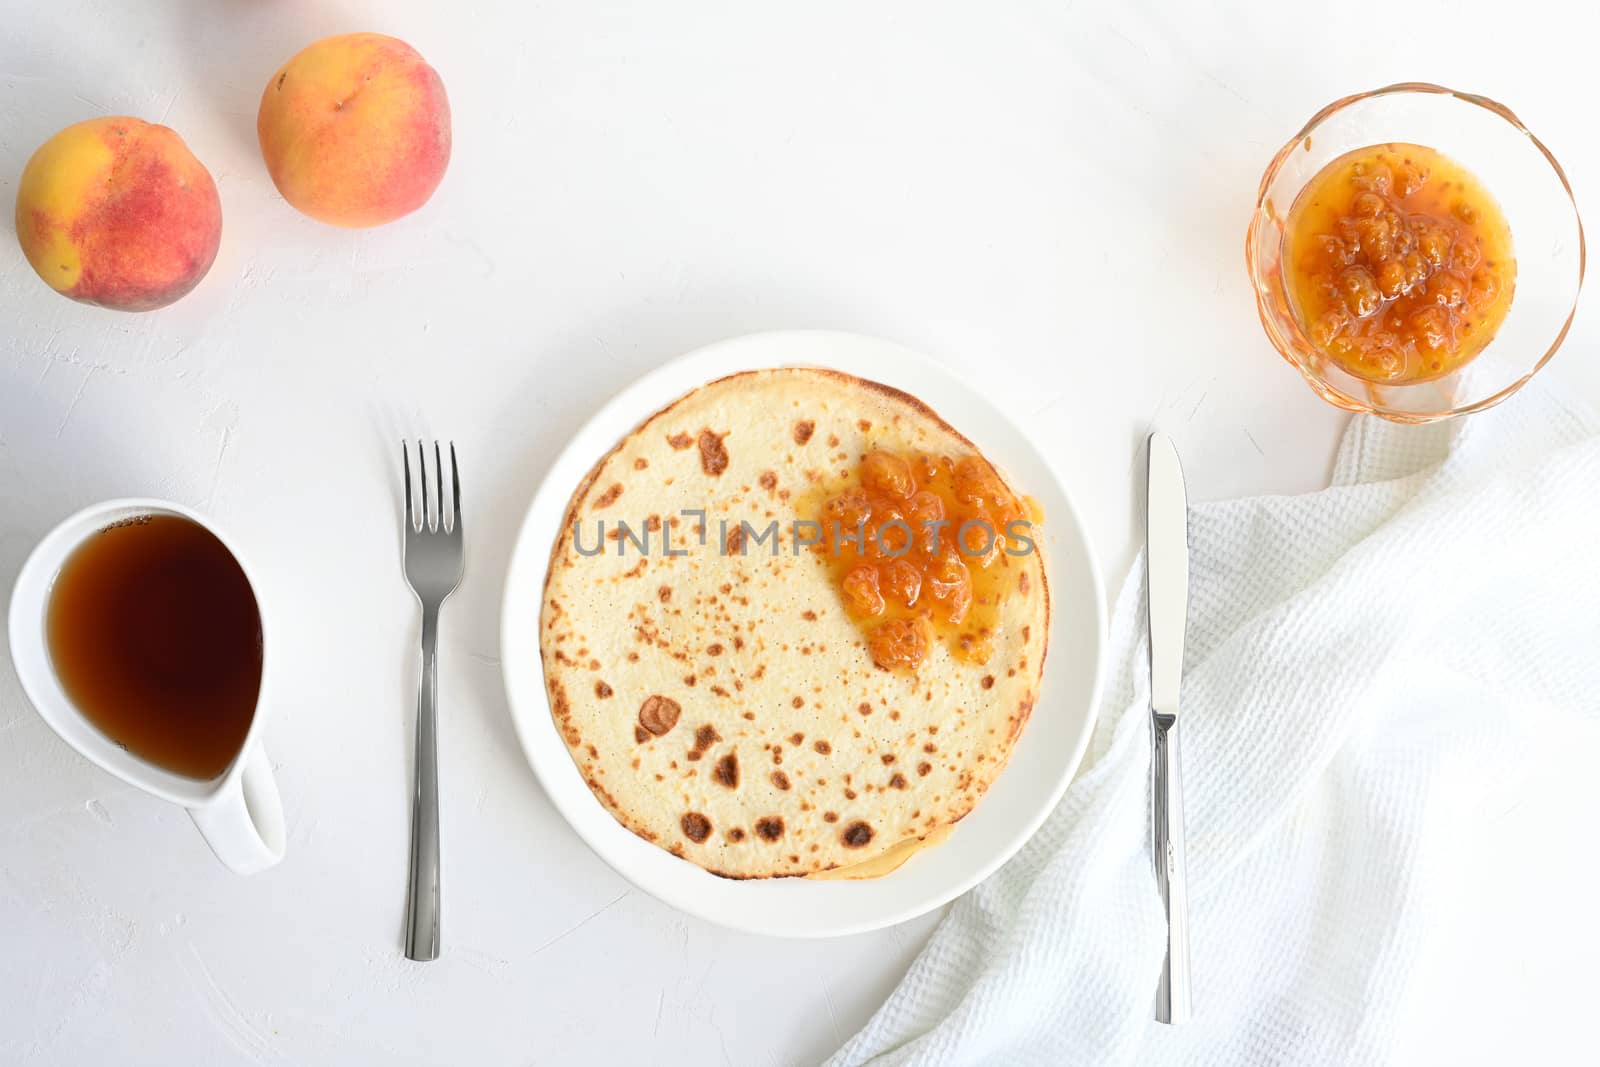 large pancakes with jam, tea and peaches on white background by sashokddt